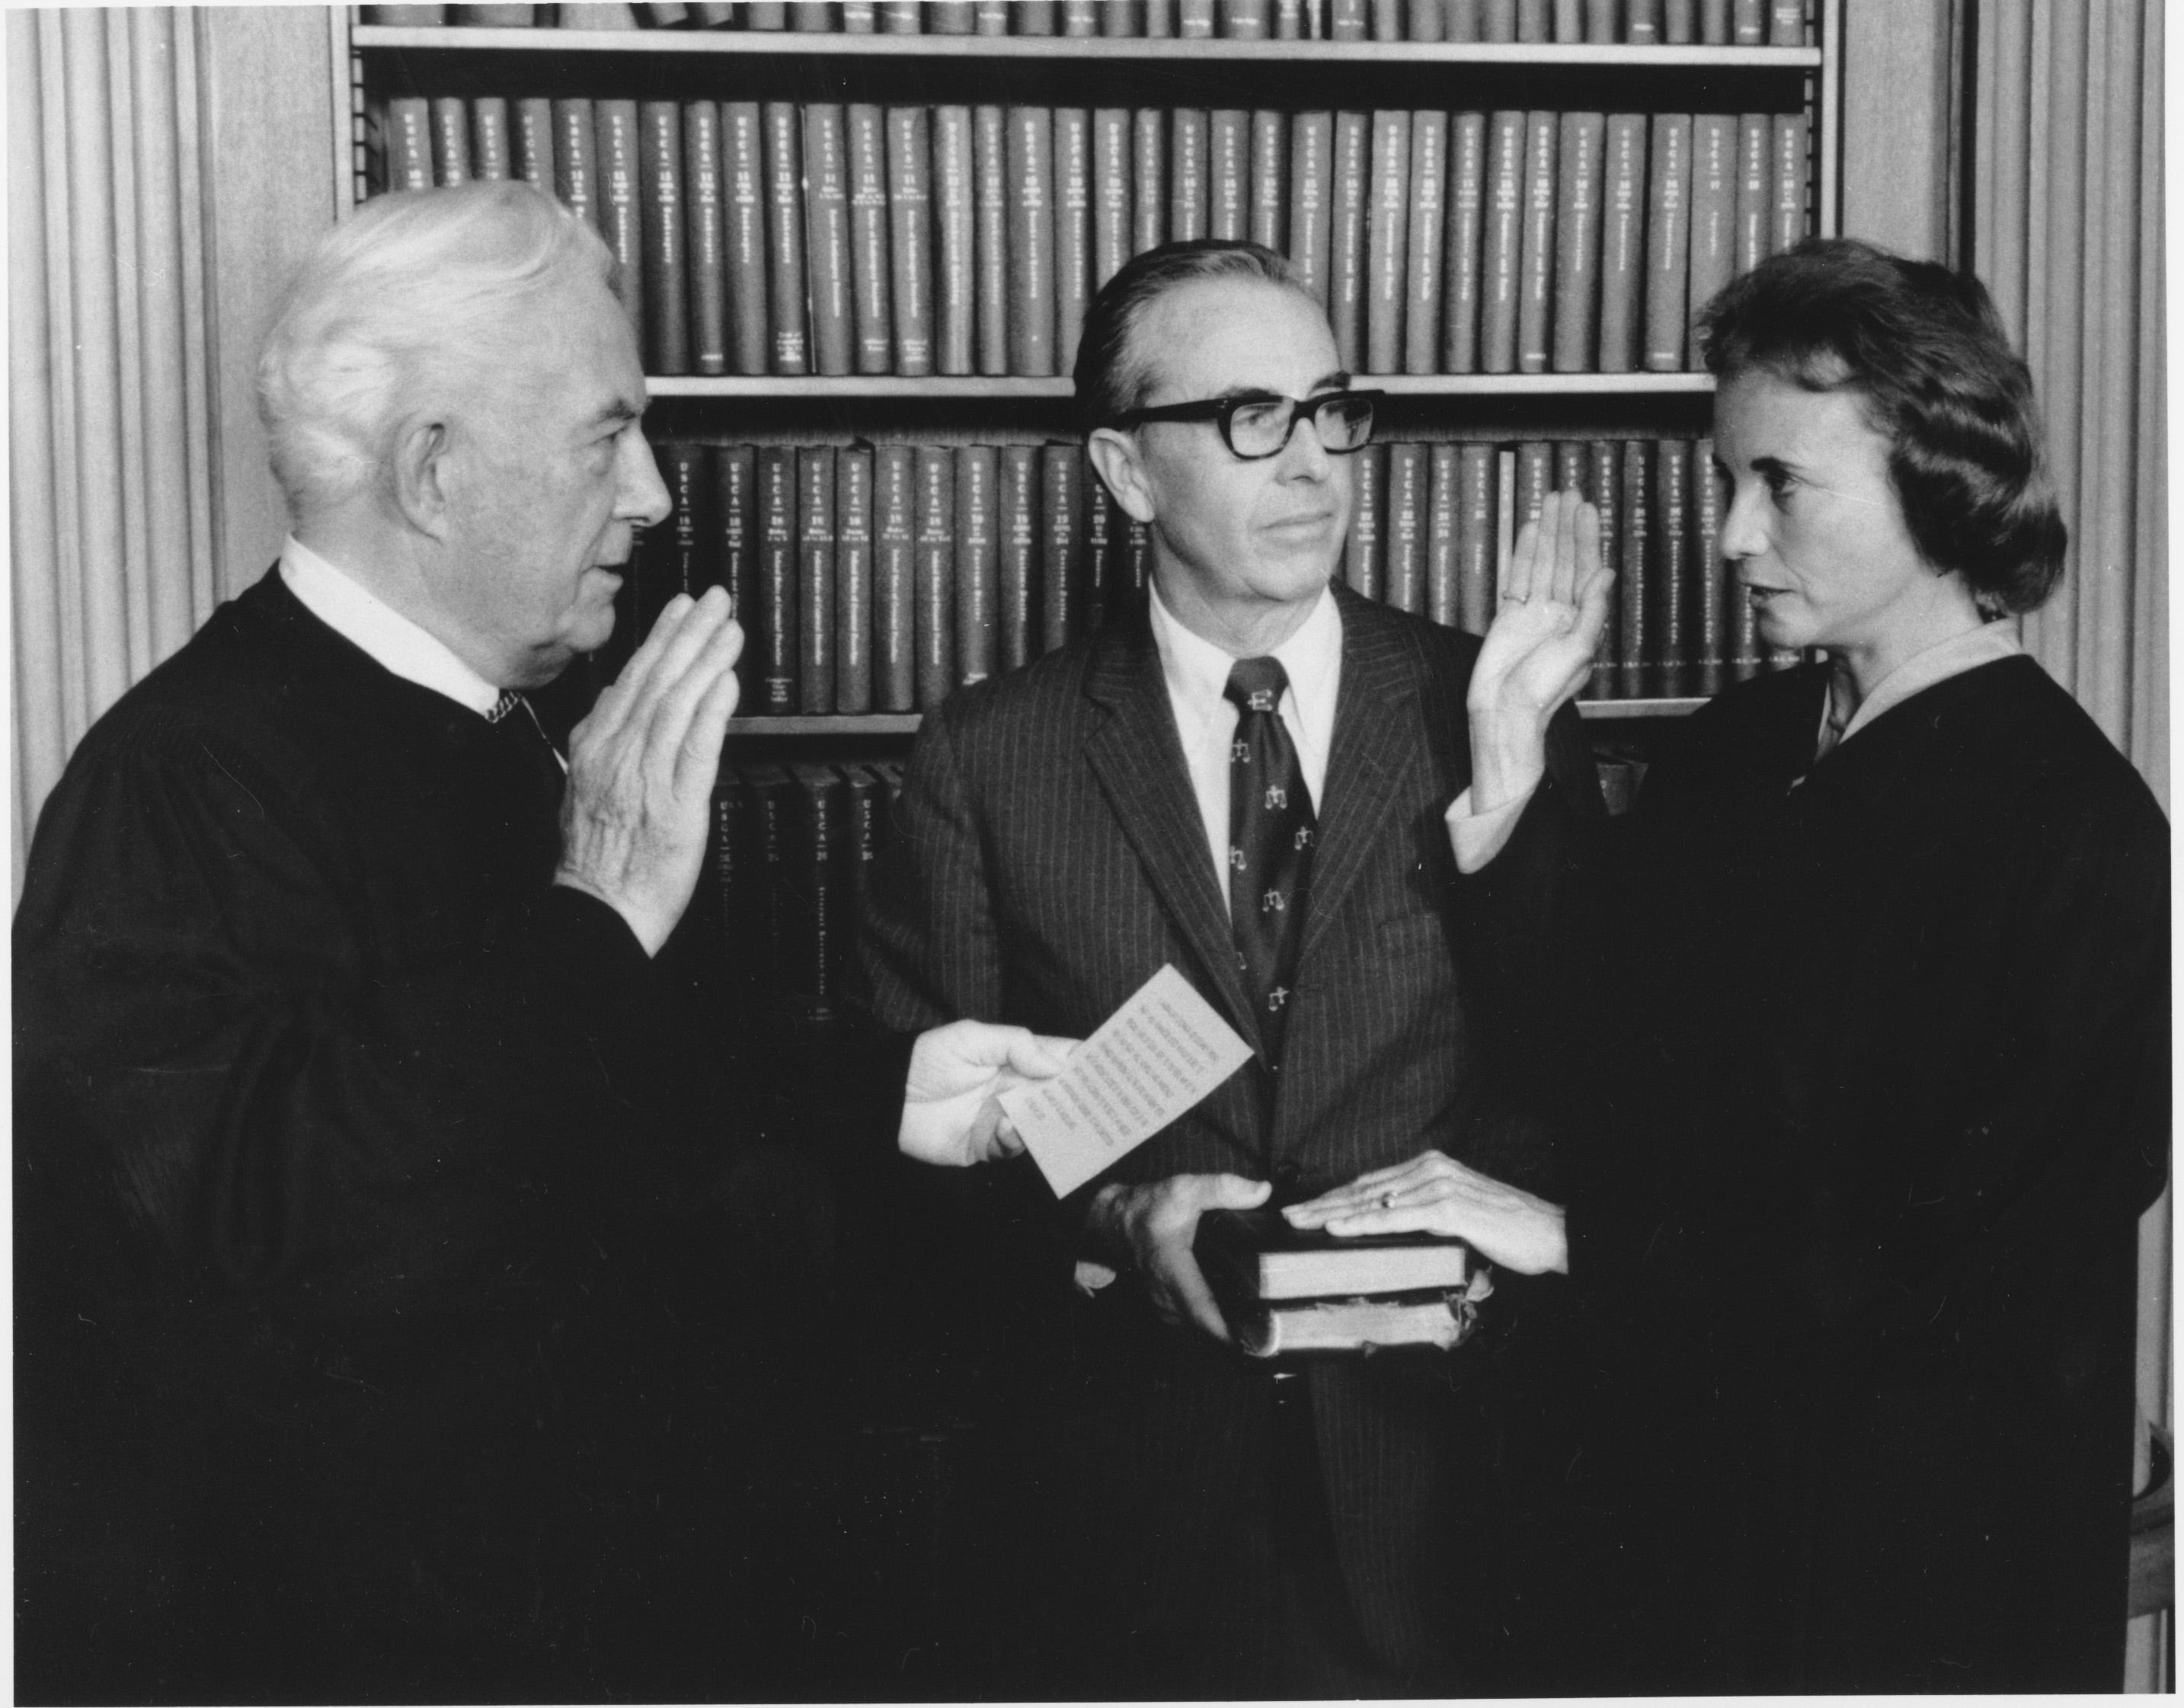 Sandra Day O'Connor is sworn in as an Associate Justice by Chief Justice Warren Burger at the Supreme Court in Washington, D.C. on Friday, Sept. 25, 1981.  Holding two family bibles, at center, is husband John J. O'Connor.